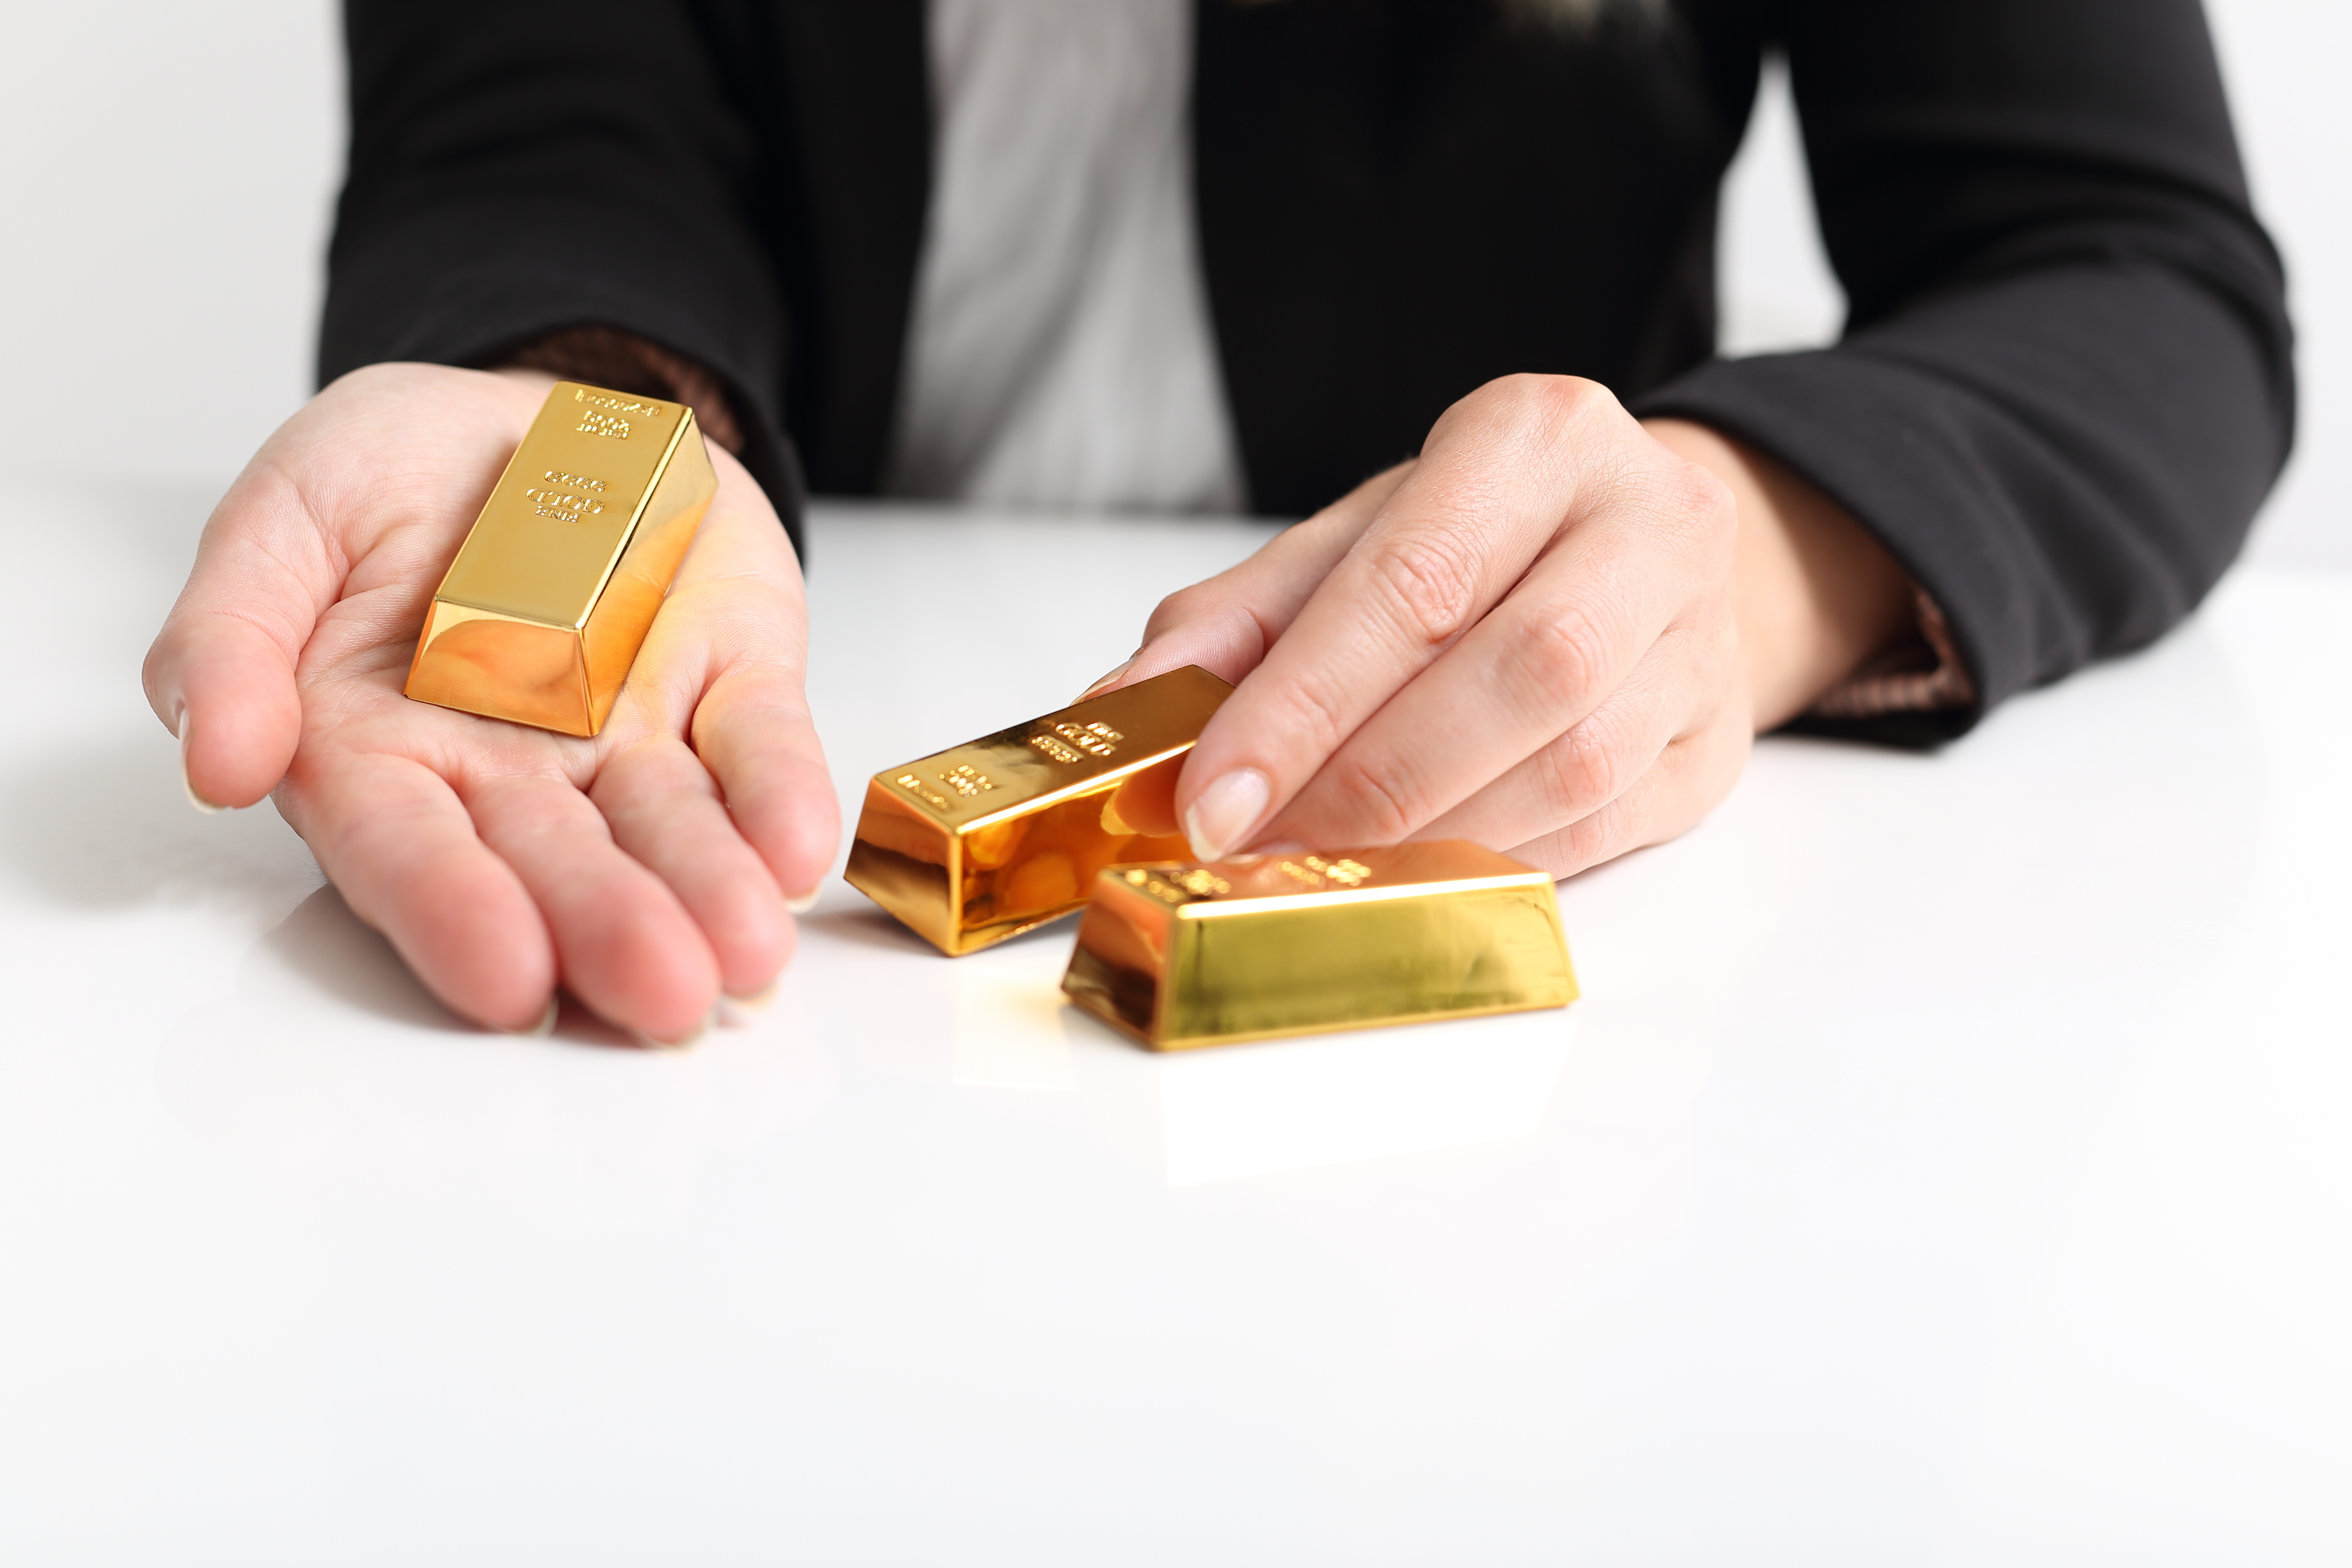 Person in business suit holding small gold bars in their hands.